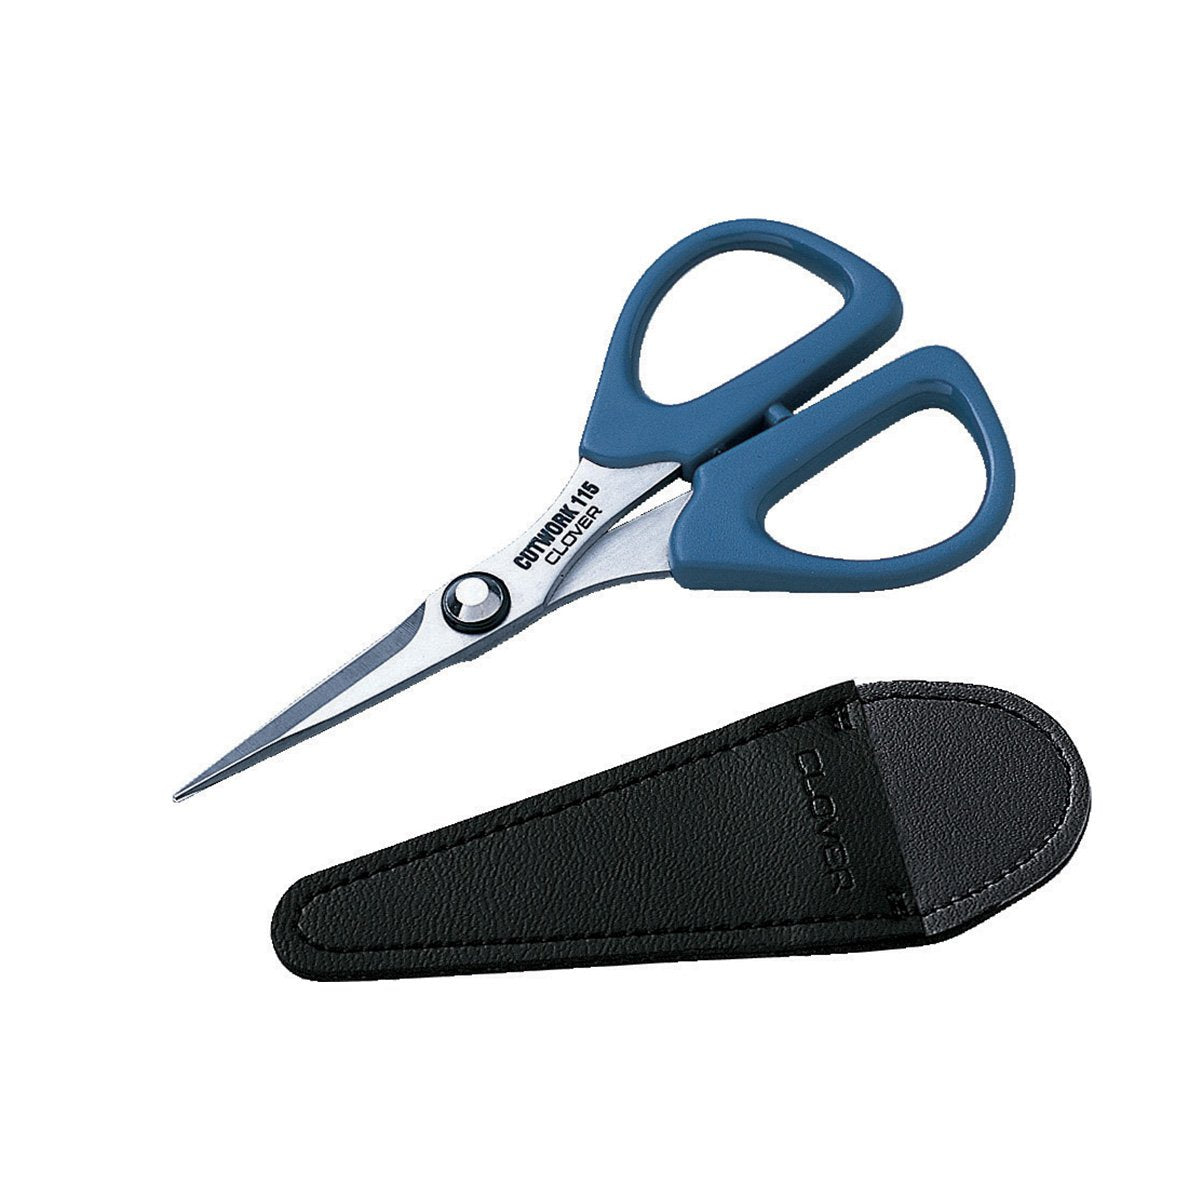 Portable Mini Sewing Scissors For Cross Stitch, Clothing, And More  Multicolor Options Available From Jkcz, $0.08